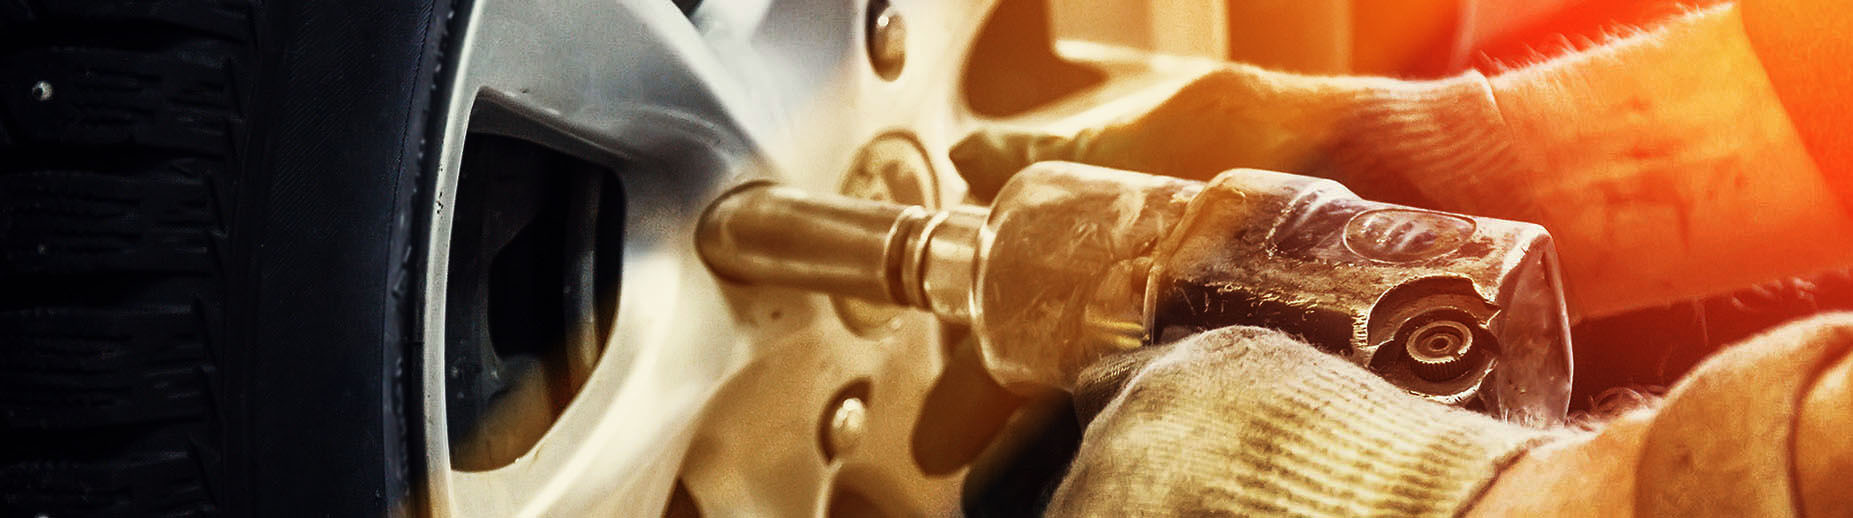 Blanchard Oil Change Services, Brake Repair and Tire Services